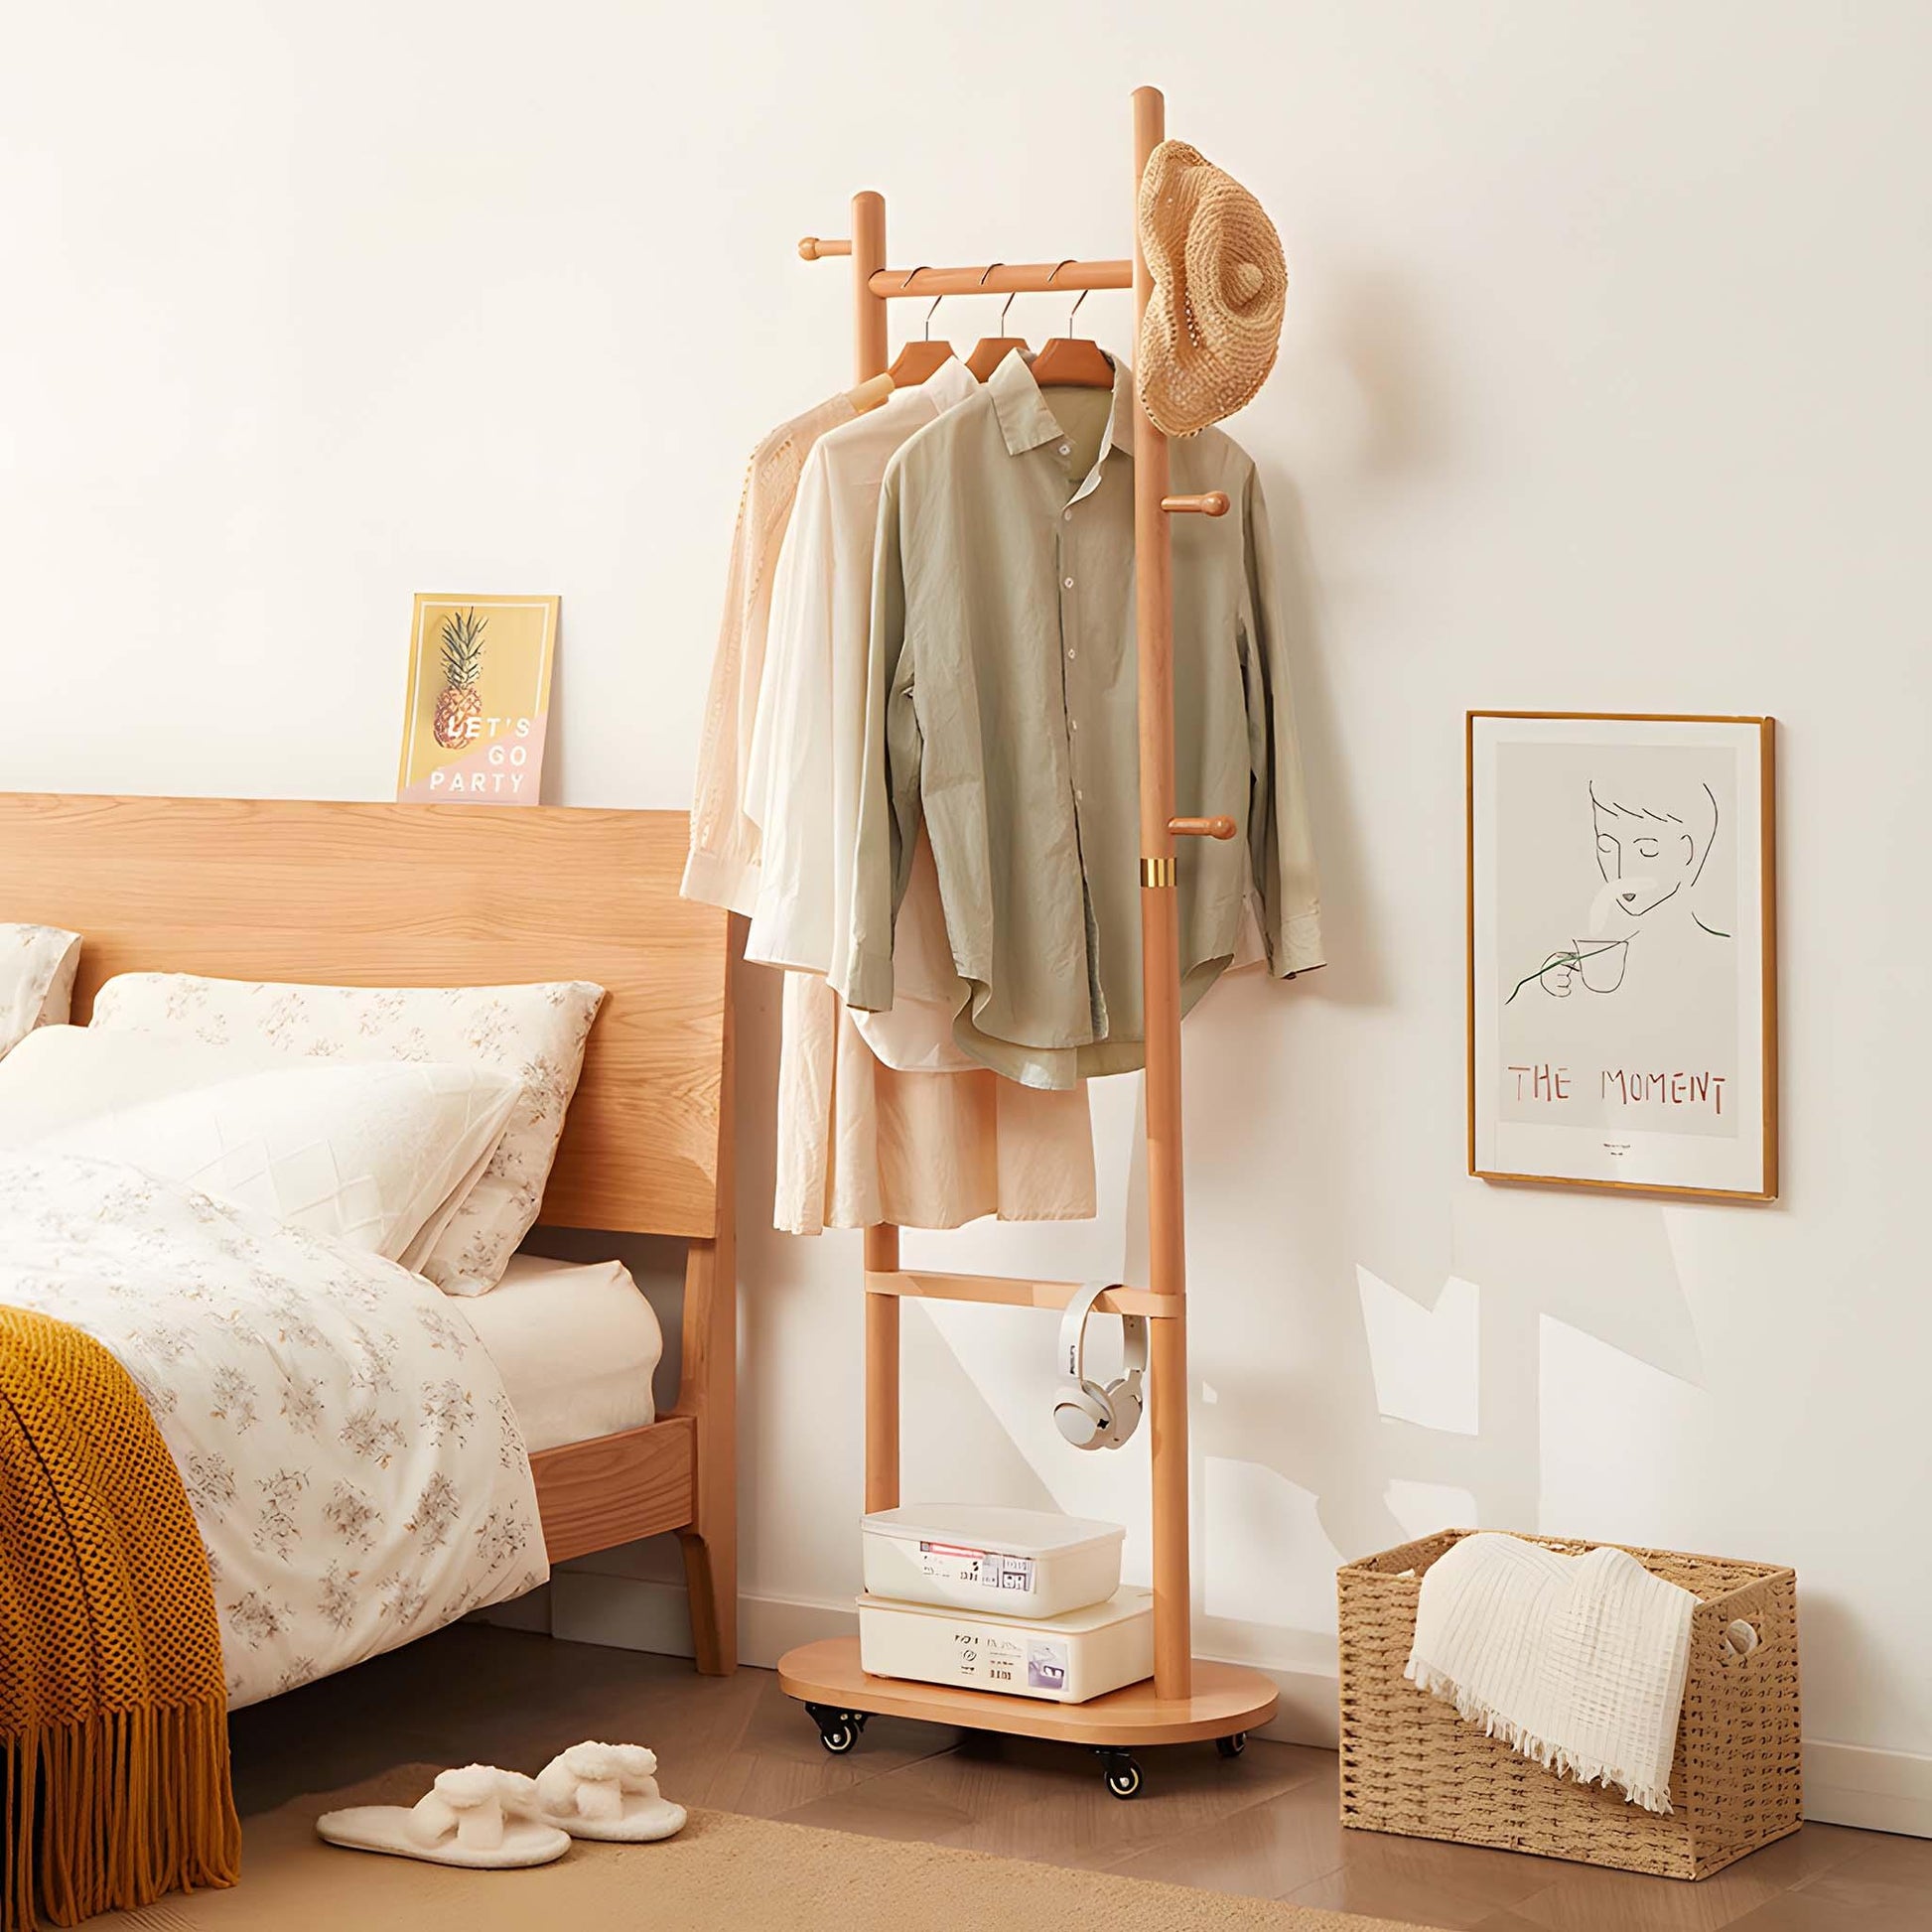 Solid Wood Clothes Rack - Rustic Charm for Laundry Room